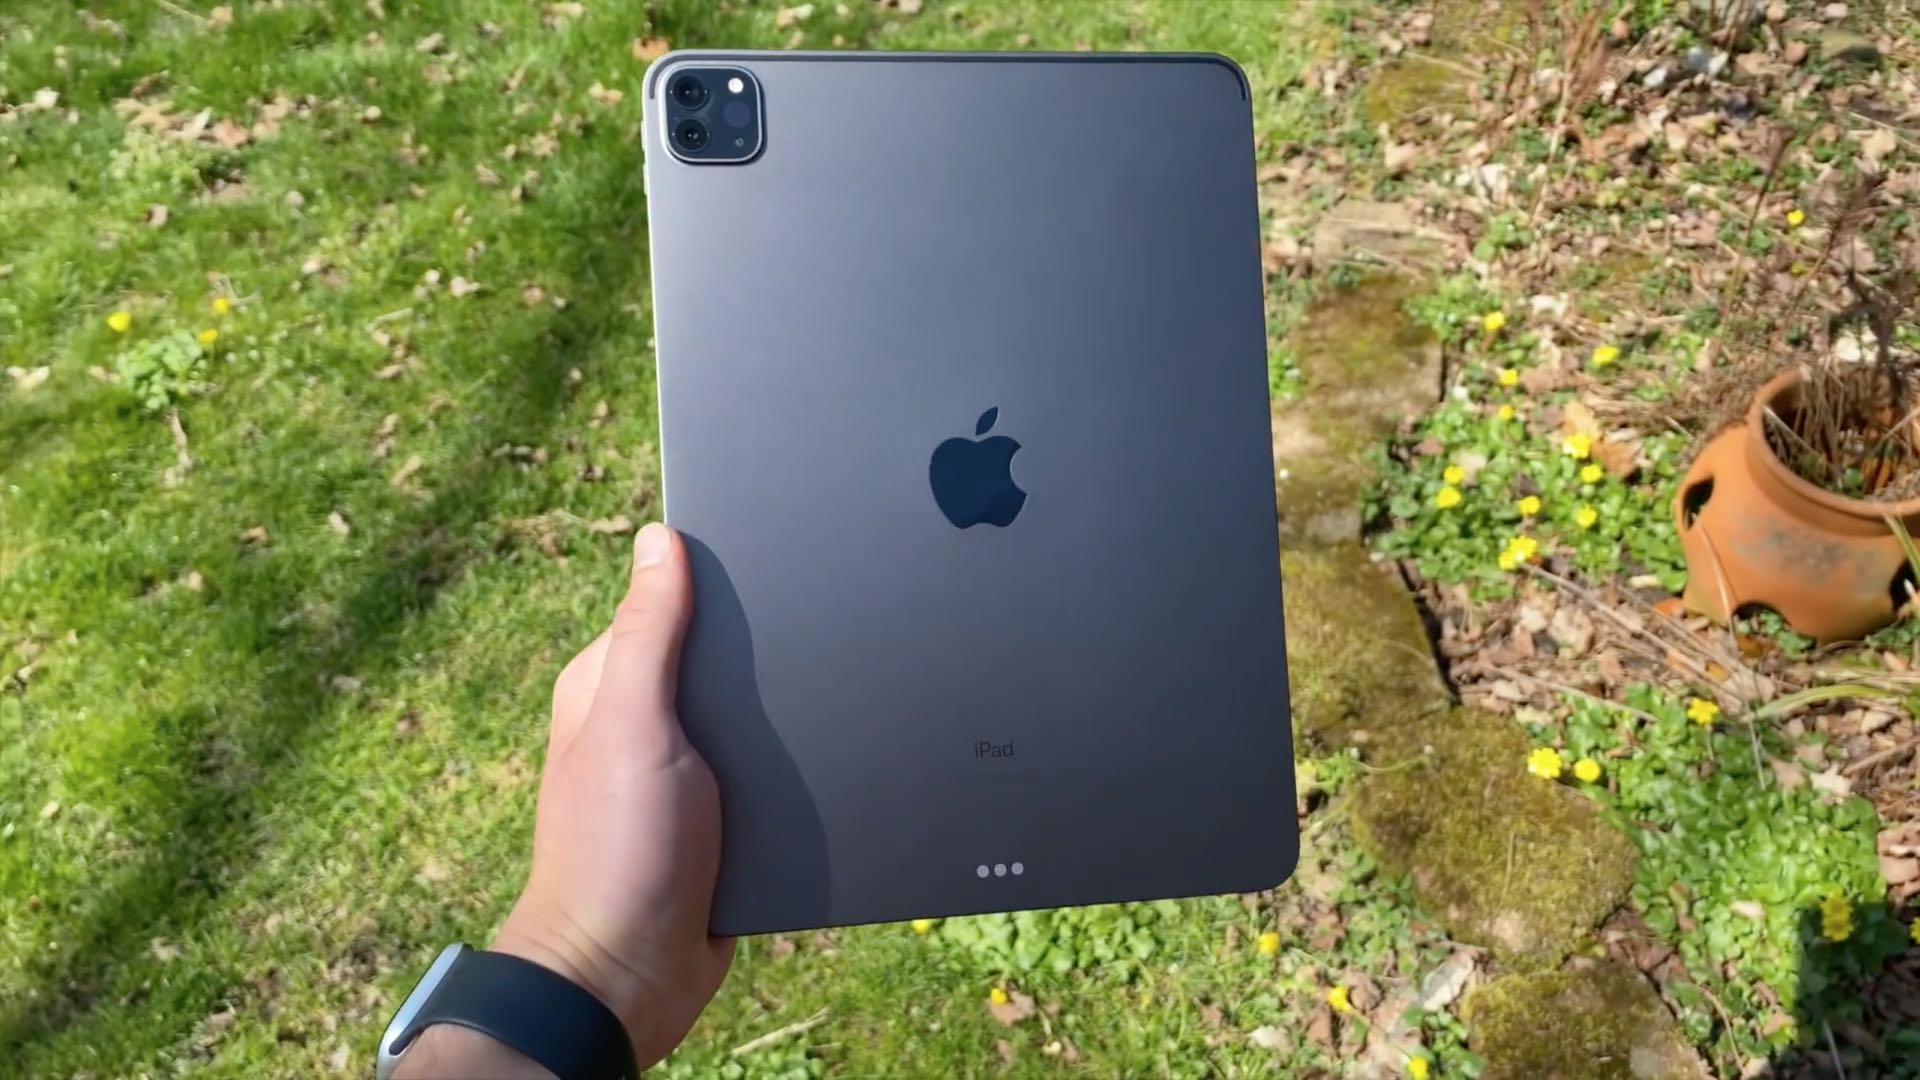 iPad Pro being held by a male's hand hand outside in a park